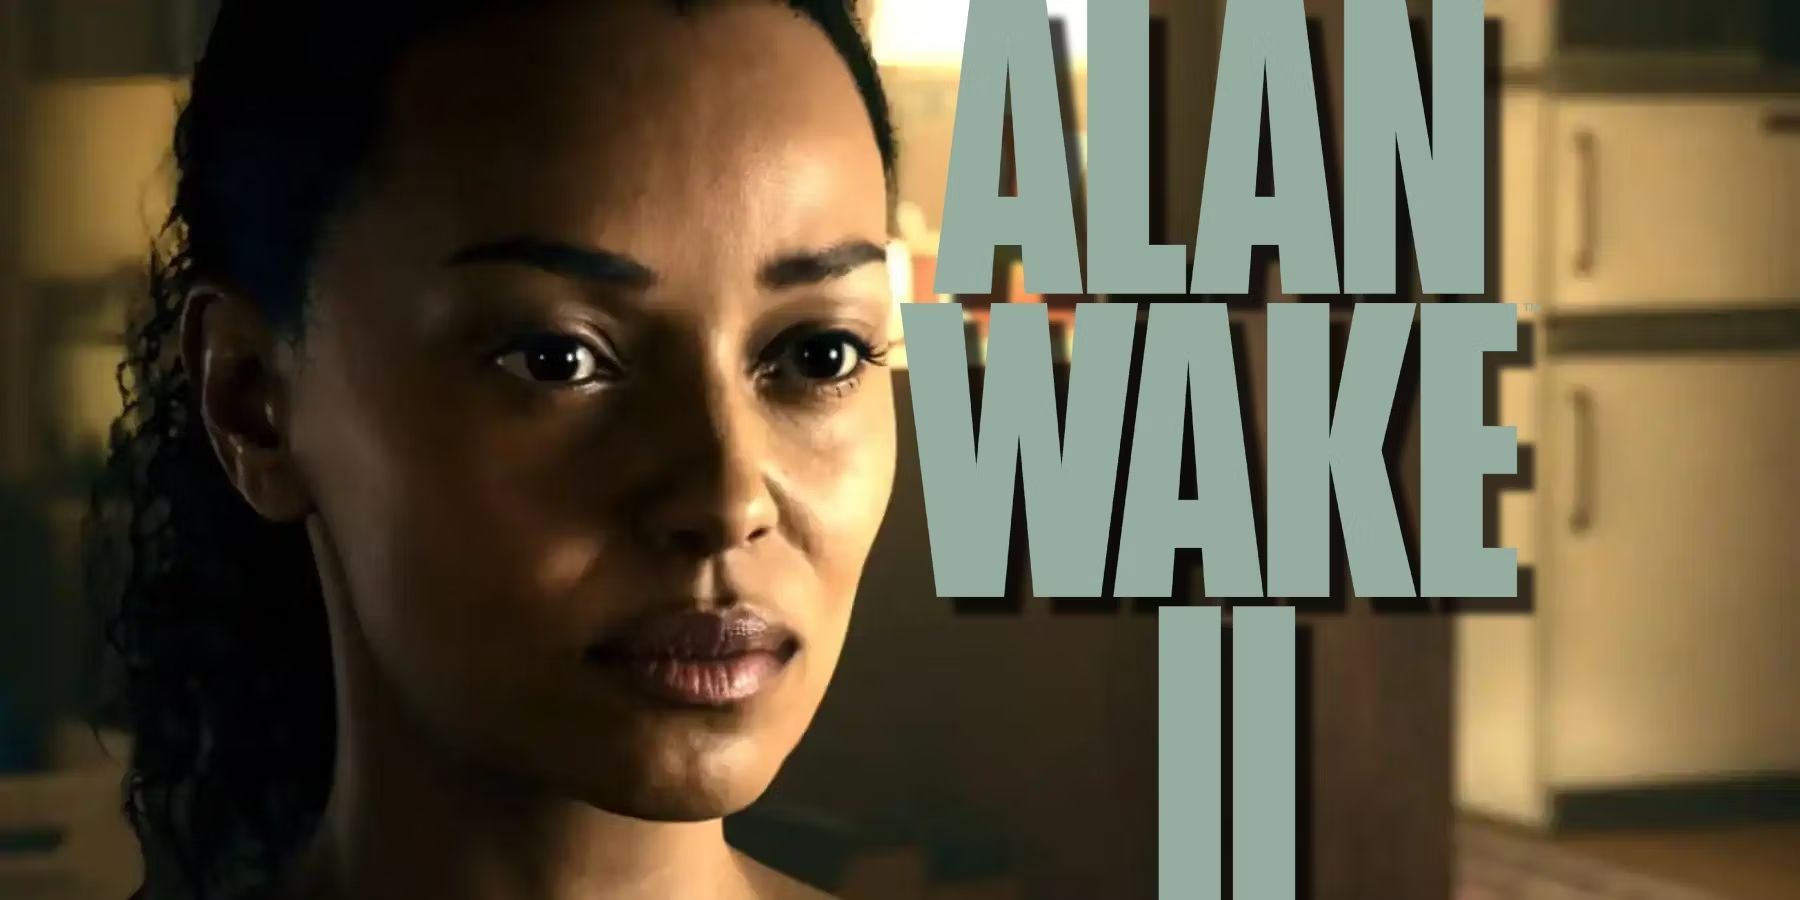 Alan Wake 2 DLC roadmap: all upcoming expansions - Video Games on